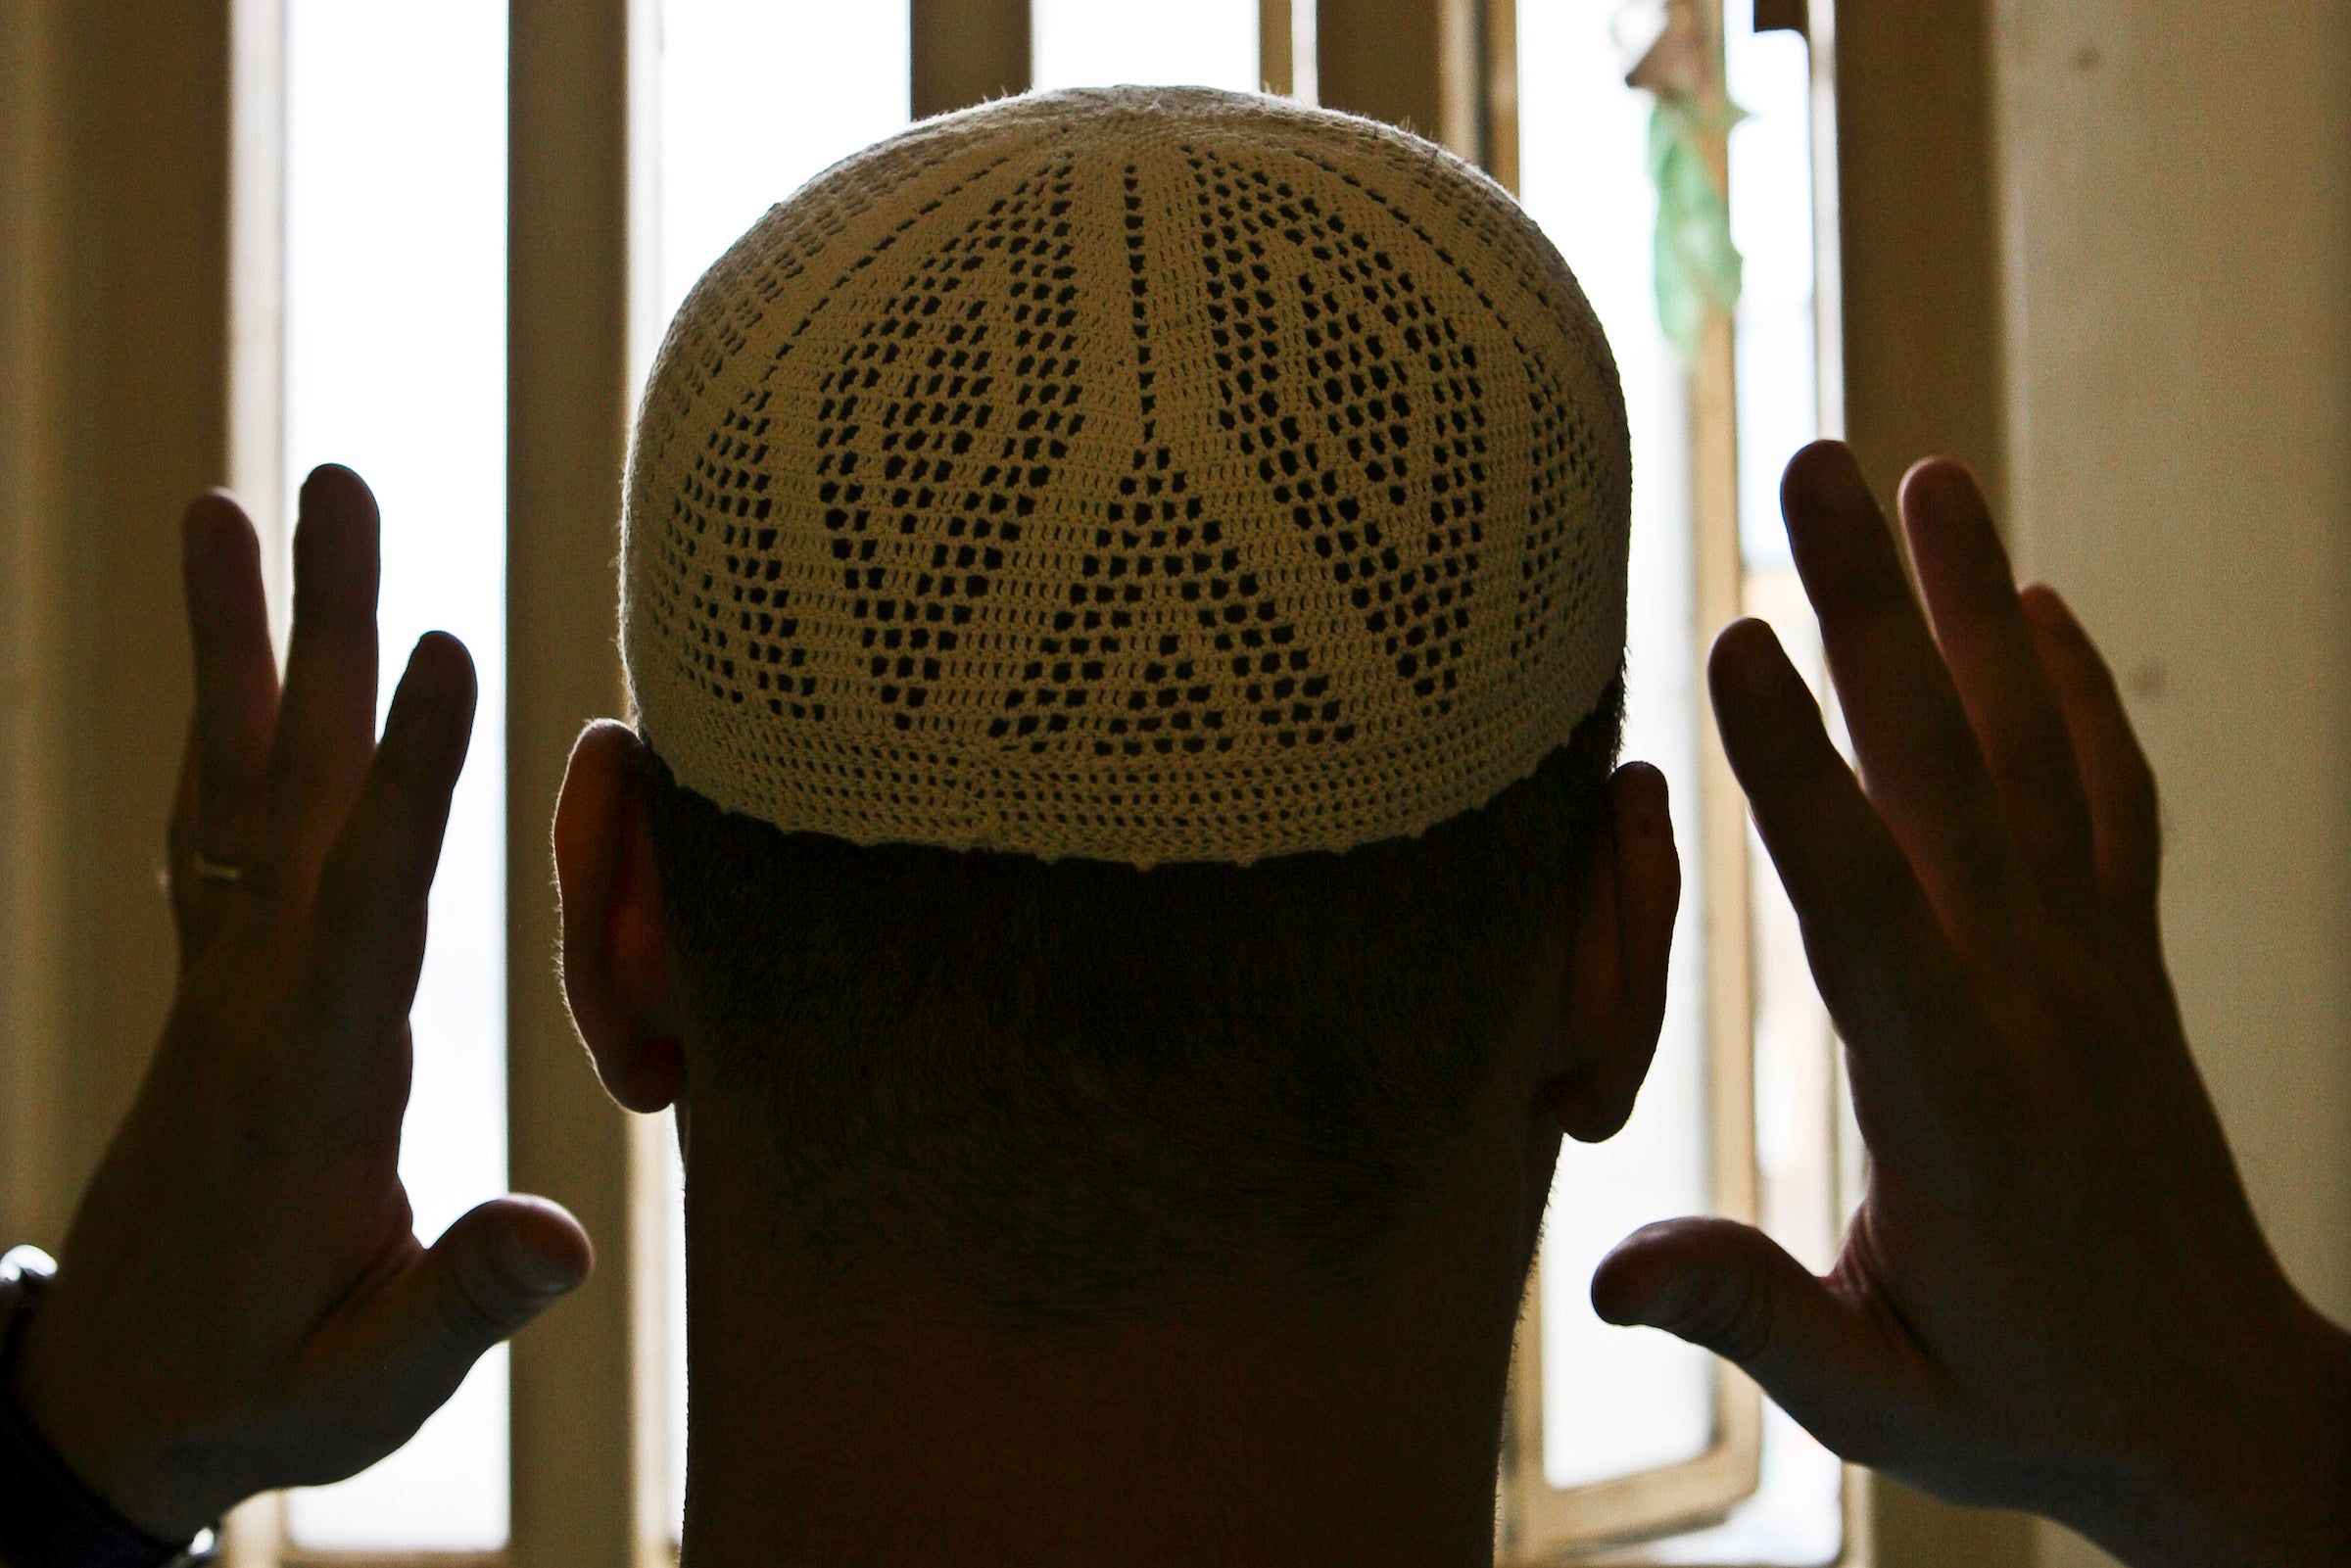 Muslims represent only 4.7 per cent of the UK population, but 14 per cent of the prison population, according to latest data – the number has almost doubled in a decade